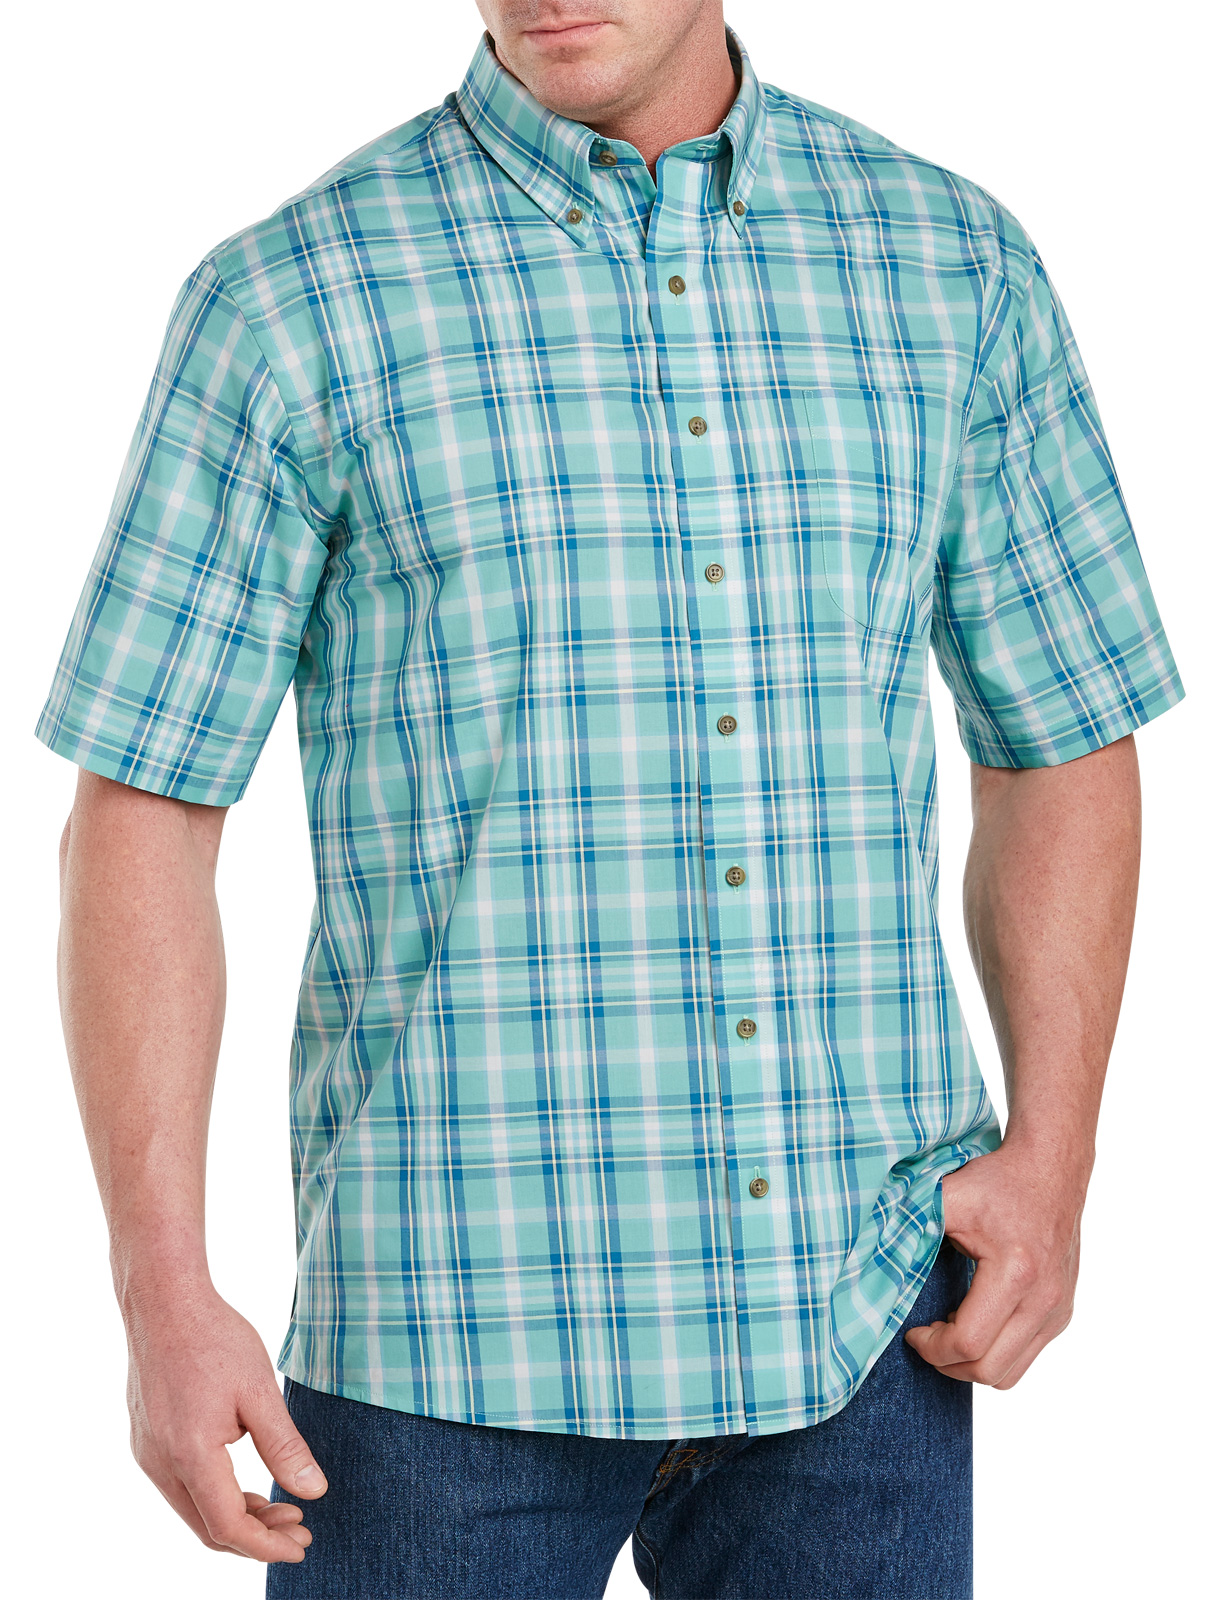 Harbor Bay Men's Big and Tall Easy-Care Large Plaid Sport Shirt